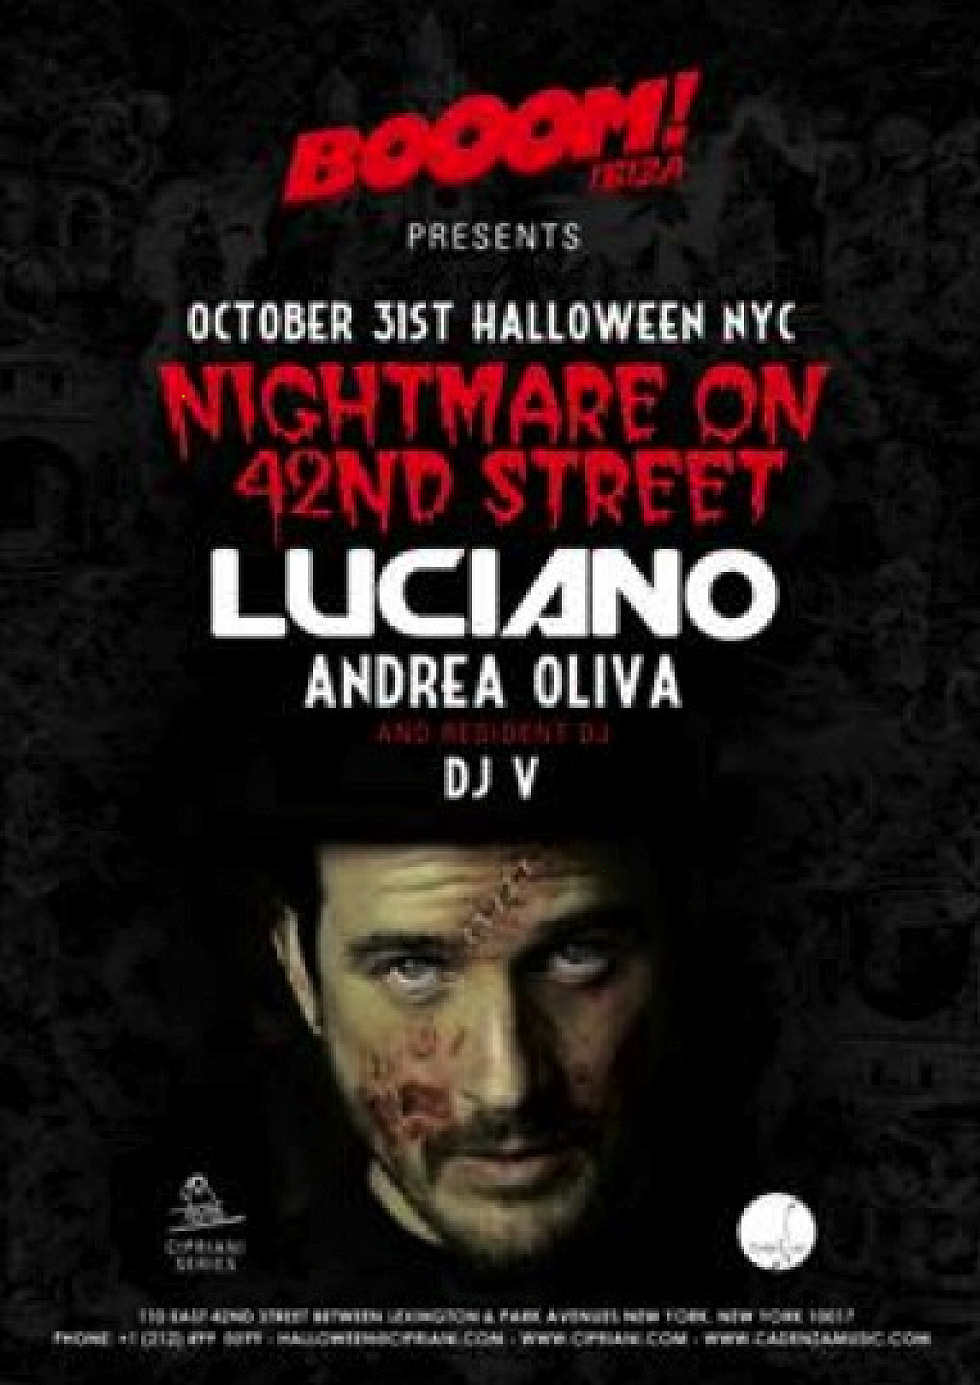 Contest: Win a pair of tickets to see Luciano @ Cipriani, NYC 10/31